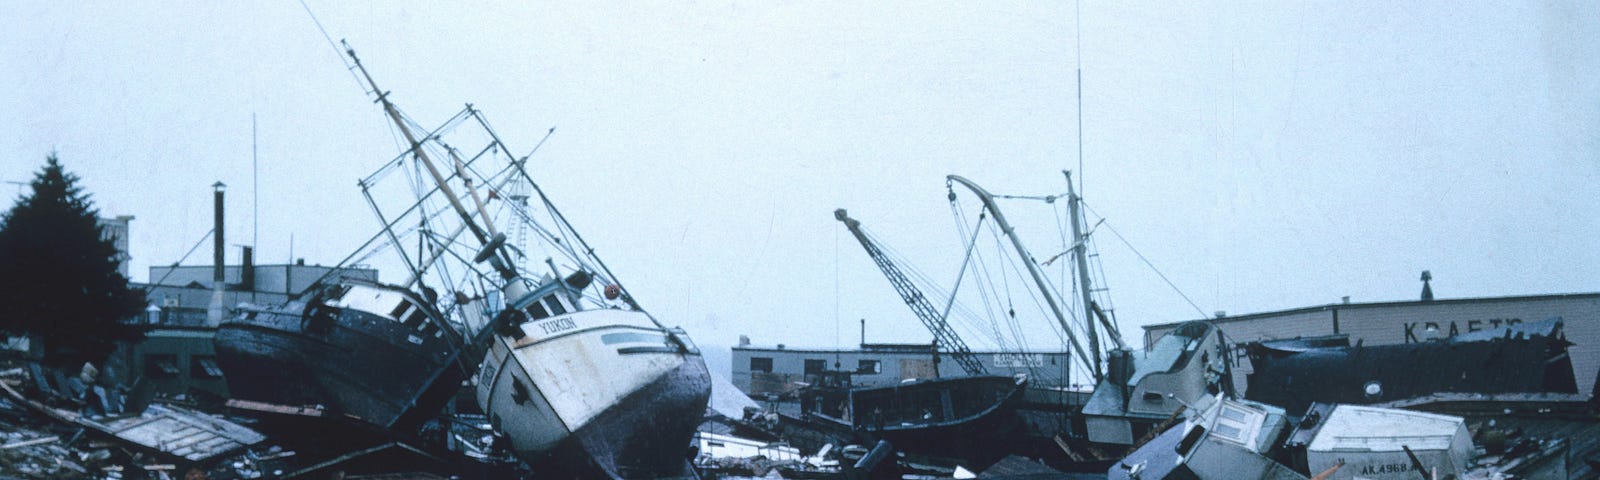 Wrecked ships and debris after a tsunami.